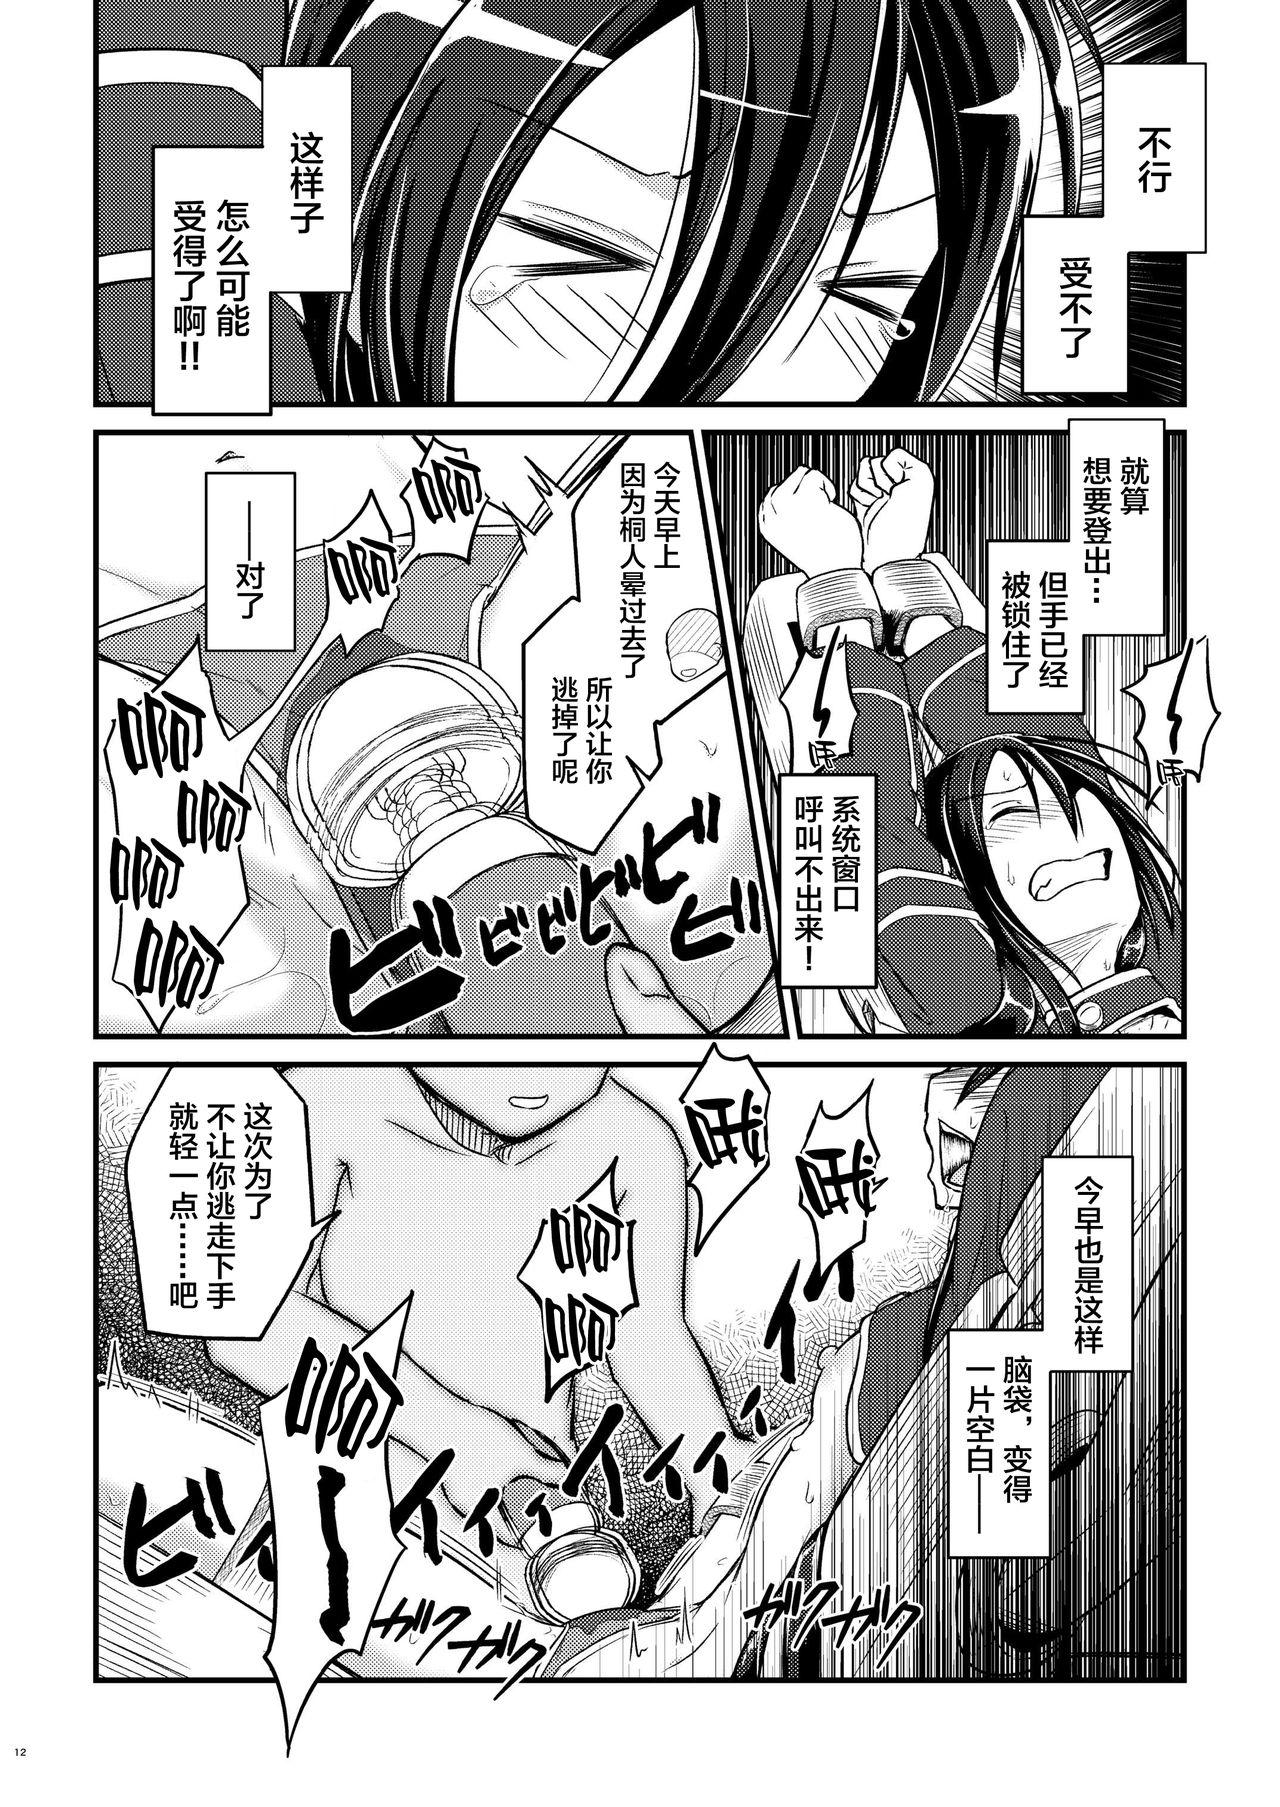 Femdom Kiriko Route Another A Part Set - Sword art online White Chick - Page 11